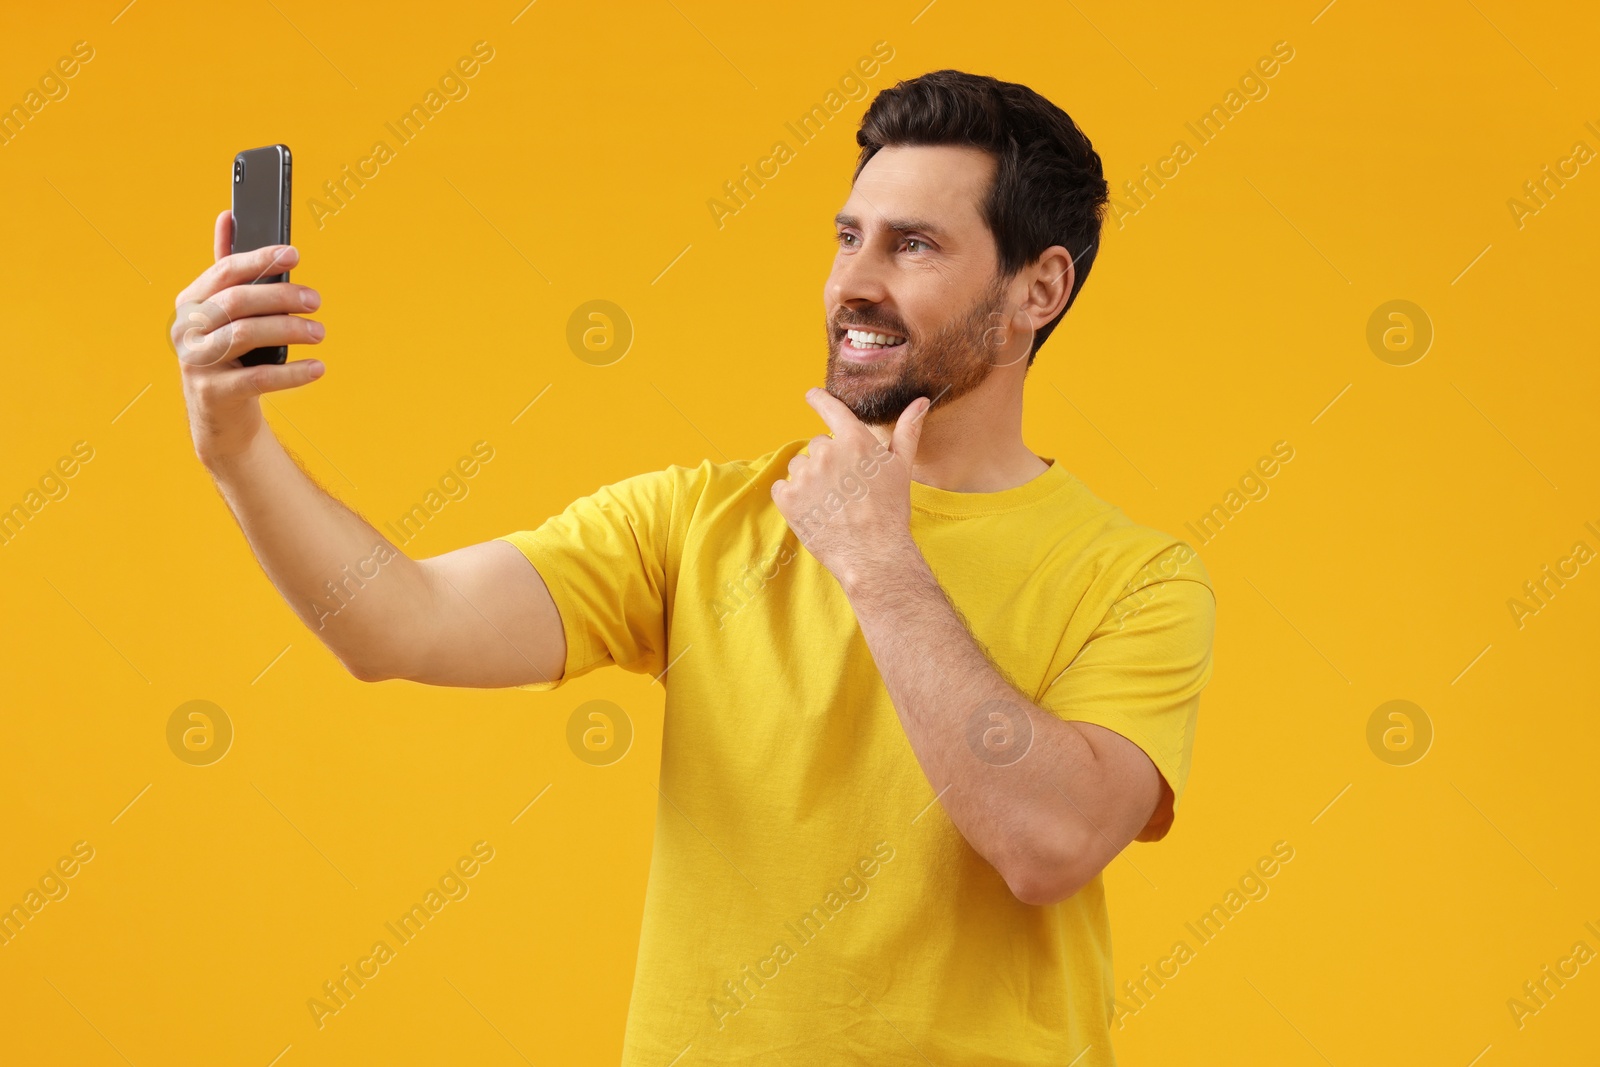 Photo of Smiling man taking selfie with smartphone on yellow background